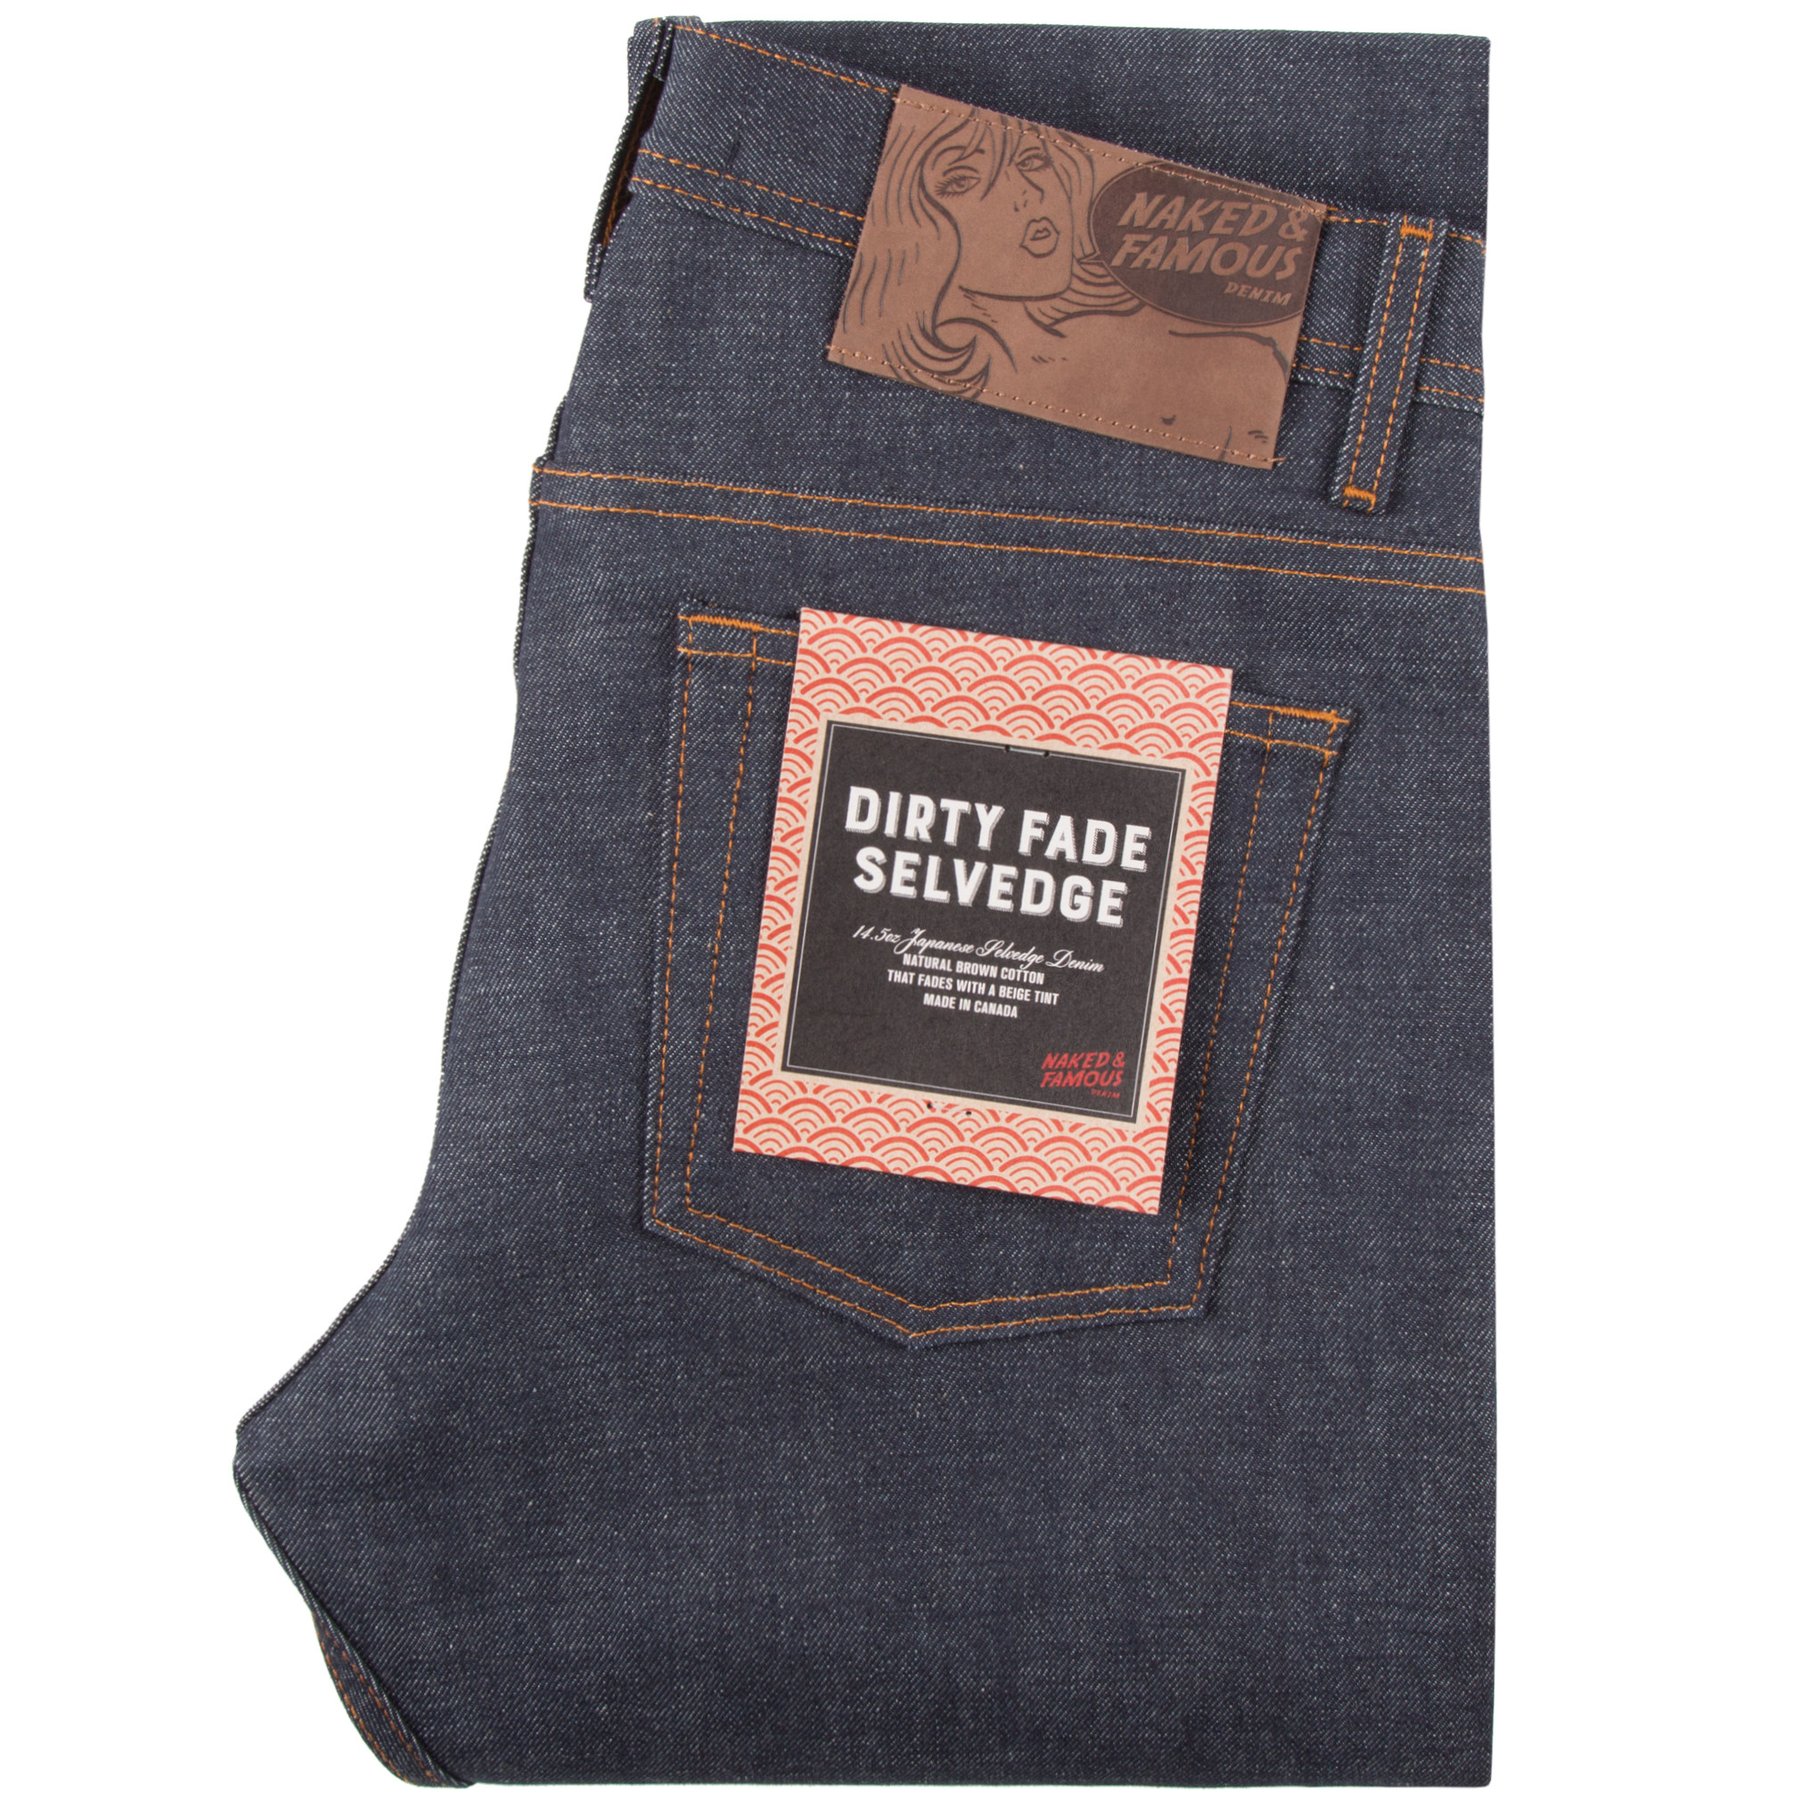  Dirty Fade Selvedge Jeans Folded 